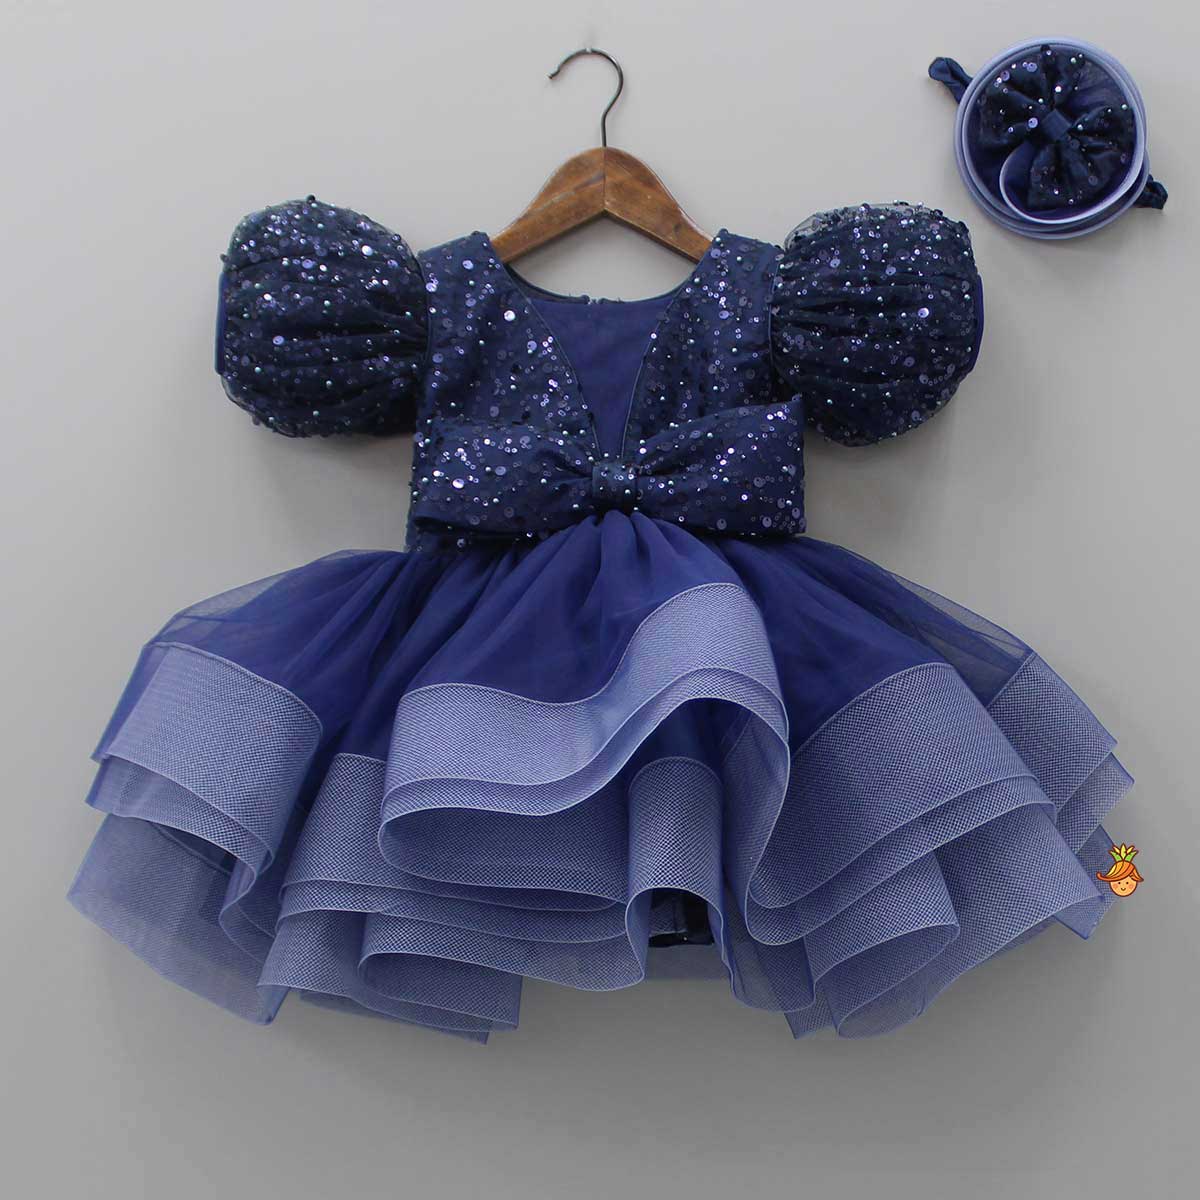 Pre Order: Sequined Ruffled Blue Dress With Bows And Matching Swirled Bow Headband